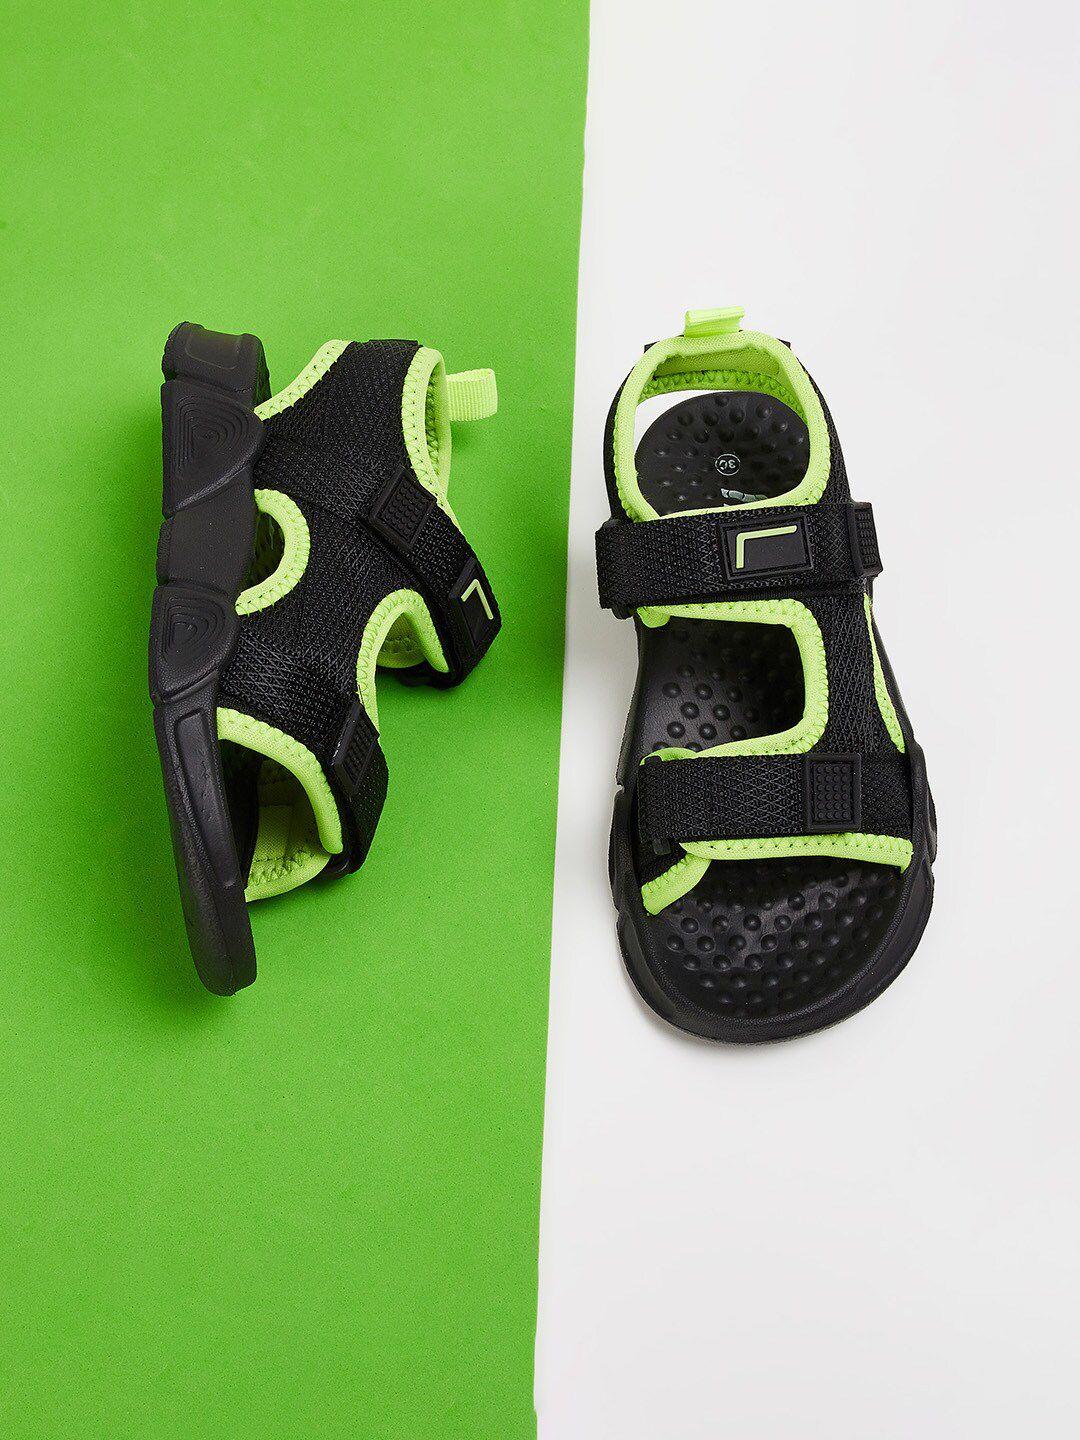 Fame Forever by Lifestyle Boys Velcro Comfort Sandals